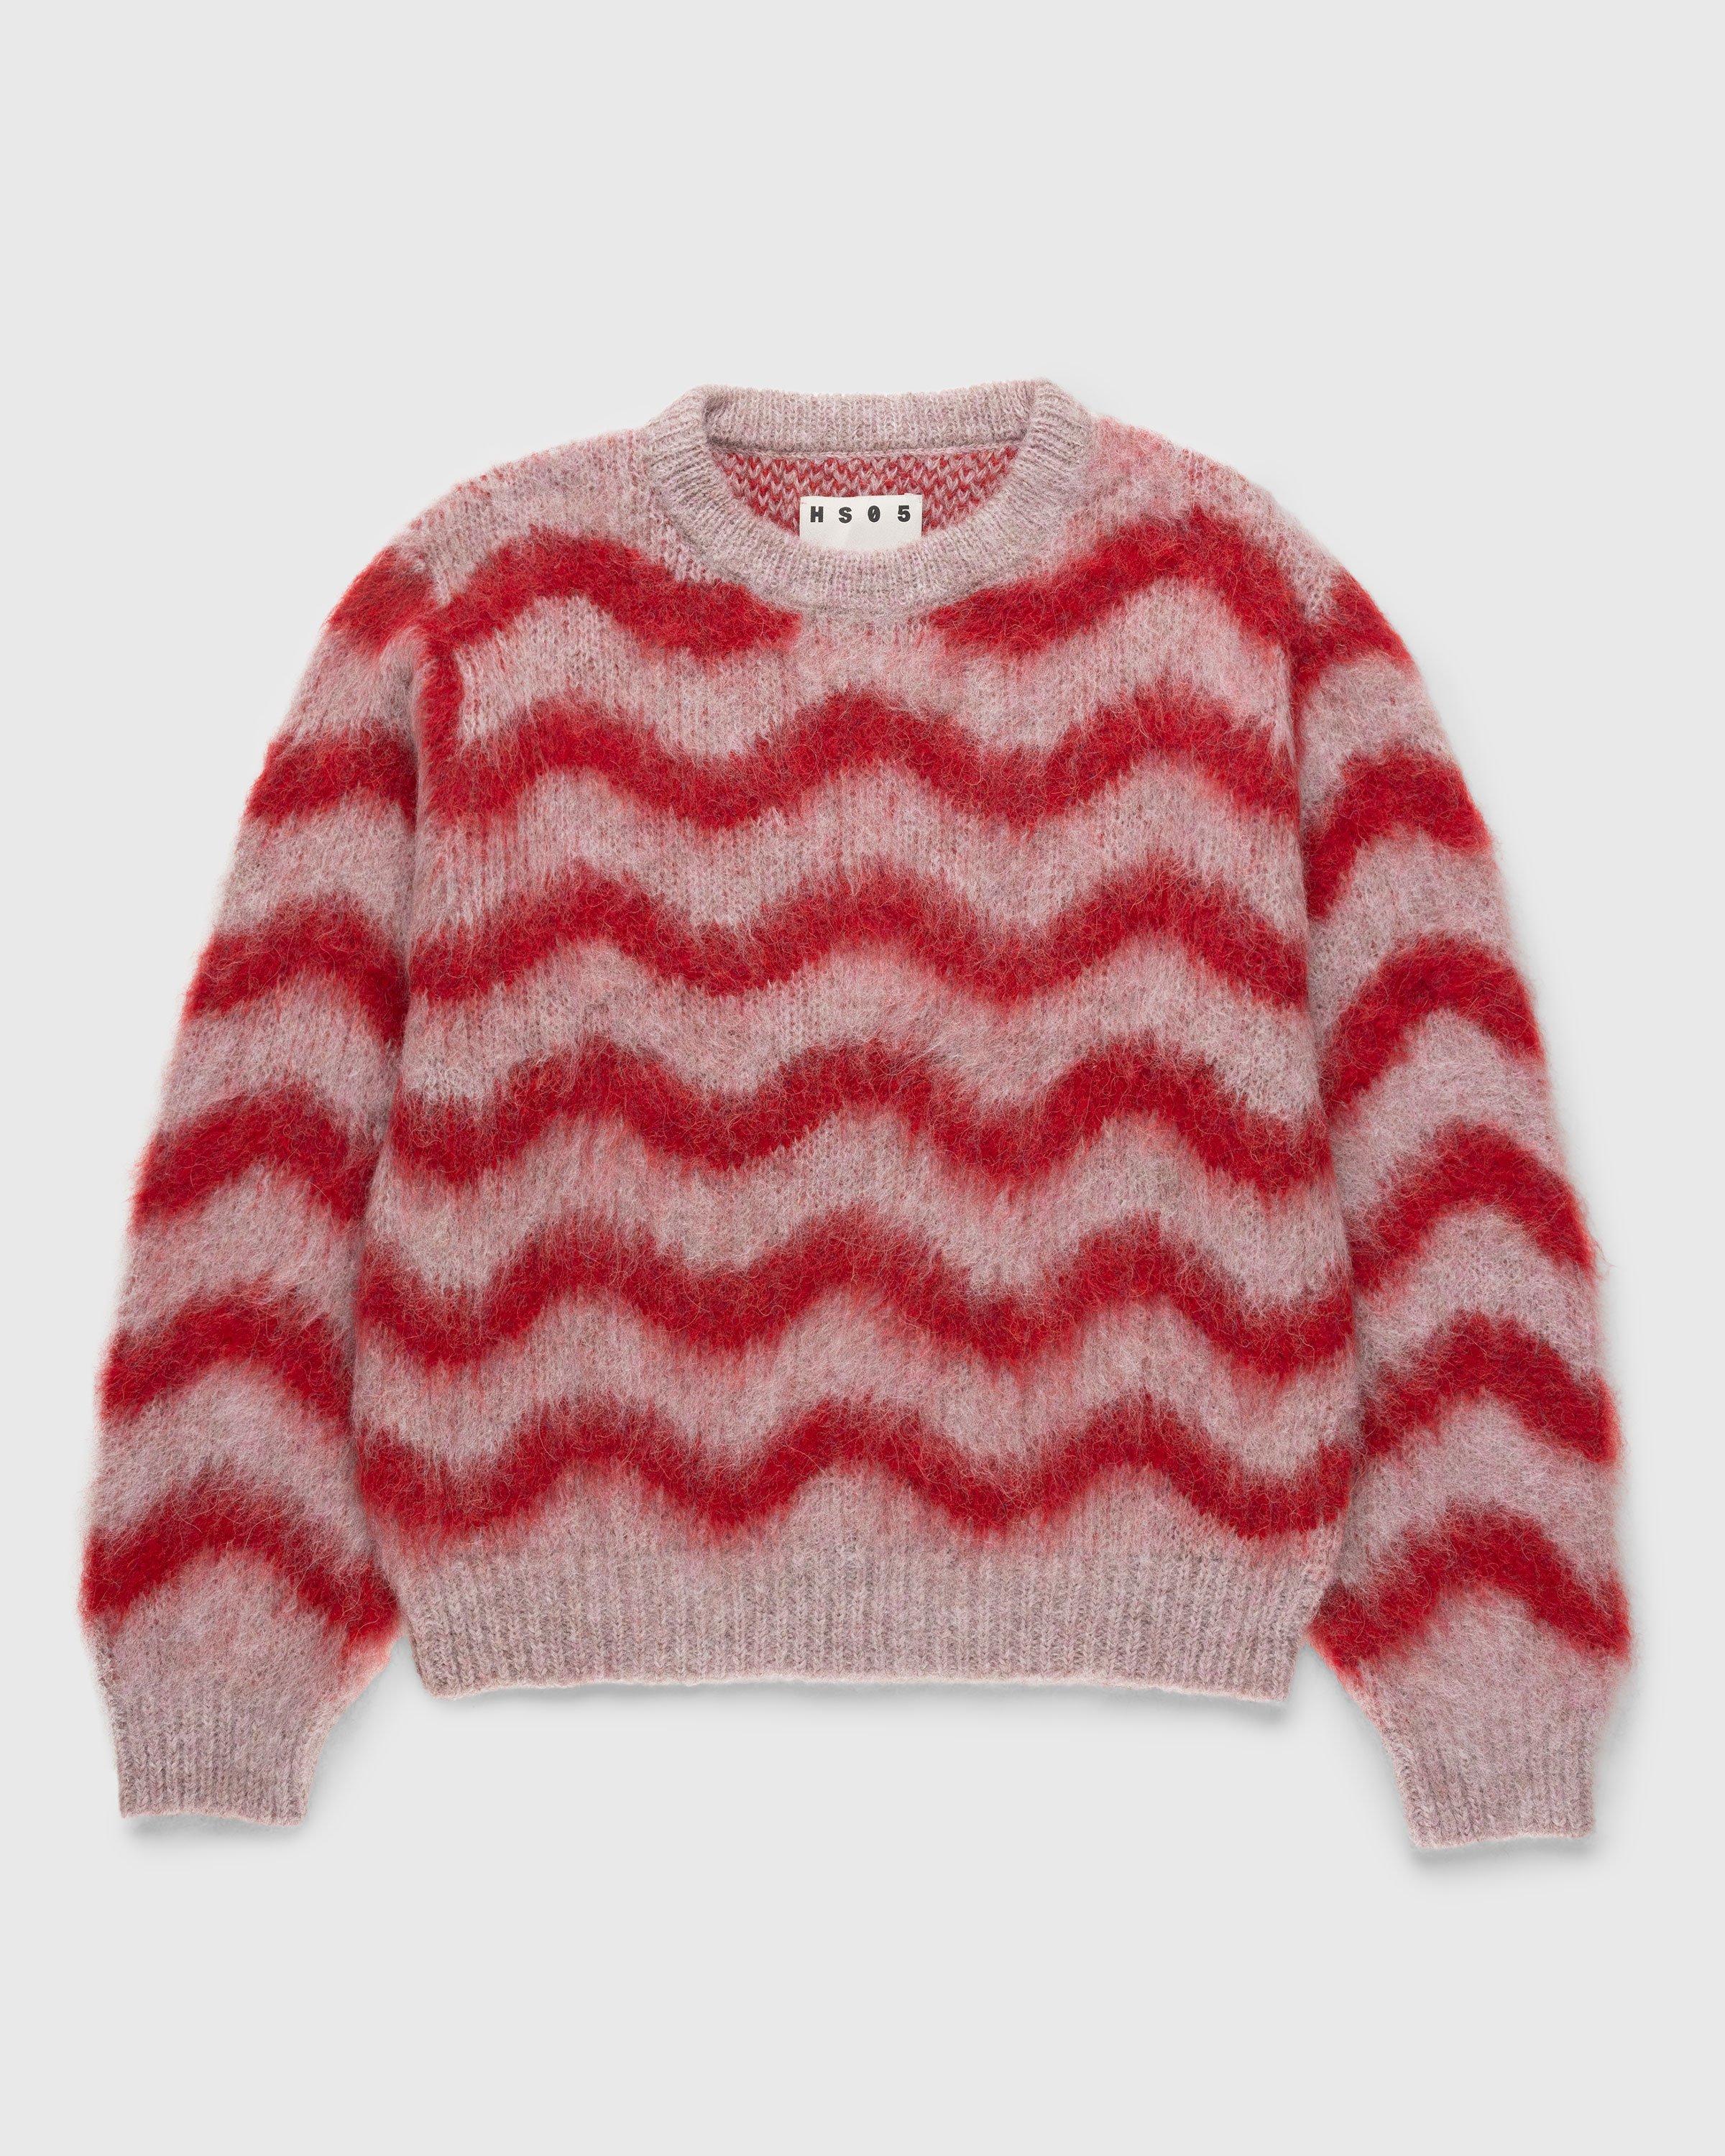 Highsnobiety HS05 - Alpaca Fuzzy Wave Sweater Pale Rose/Red - Clothing - Multi - Image 1